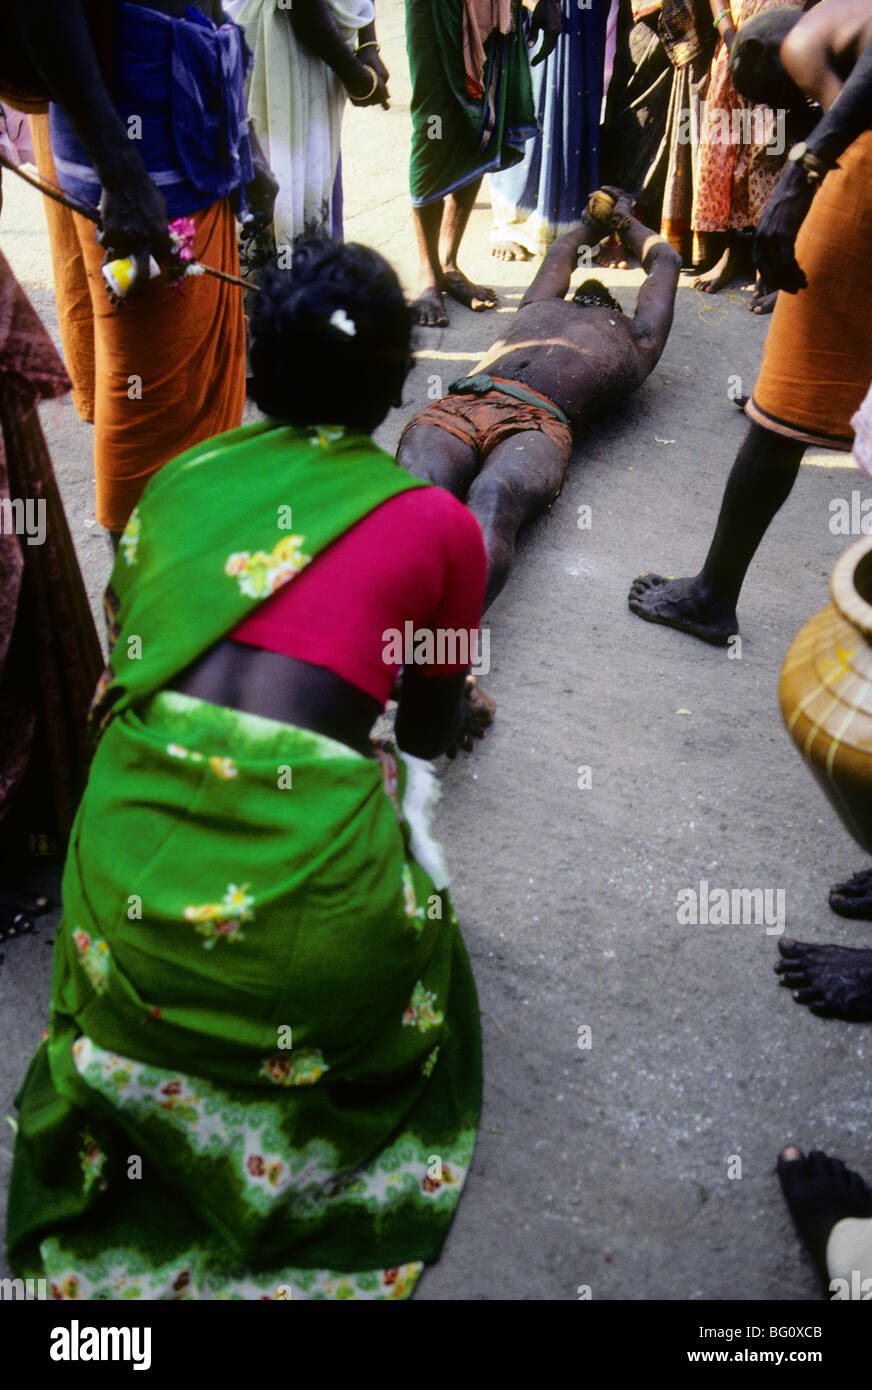 A pilgrim rolls on the ground which is hard pavement completely around the Palani Murugan Temple holding a coconut during the annual Hindu Thaipusam festival. He is assisted by family members who occasionally give her water. This is a form of kavadi which is an act of devotion represented by the hardship and pain she is experiencing. Stock Photo